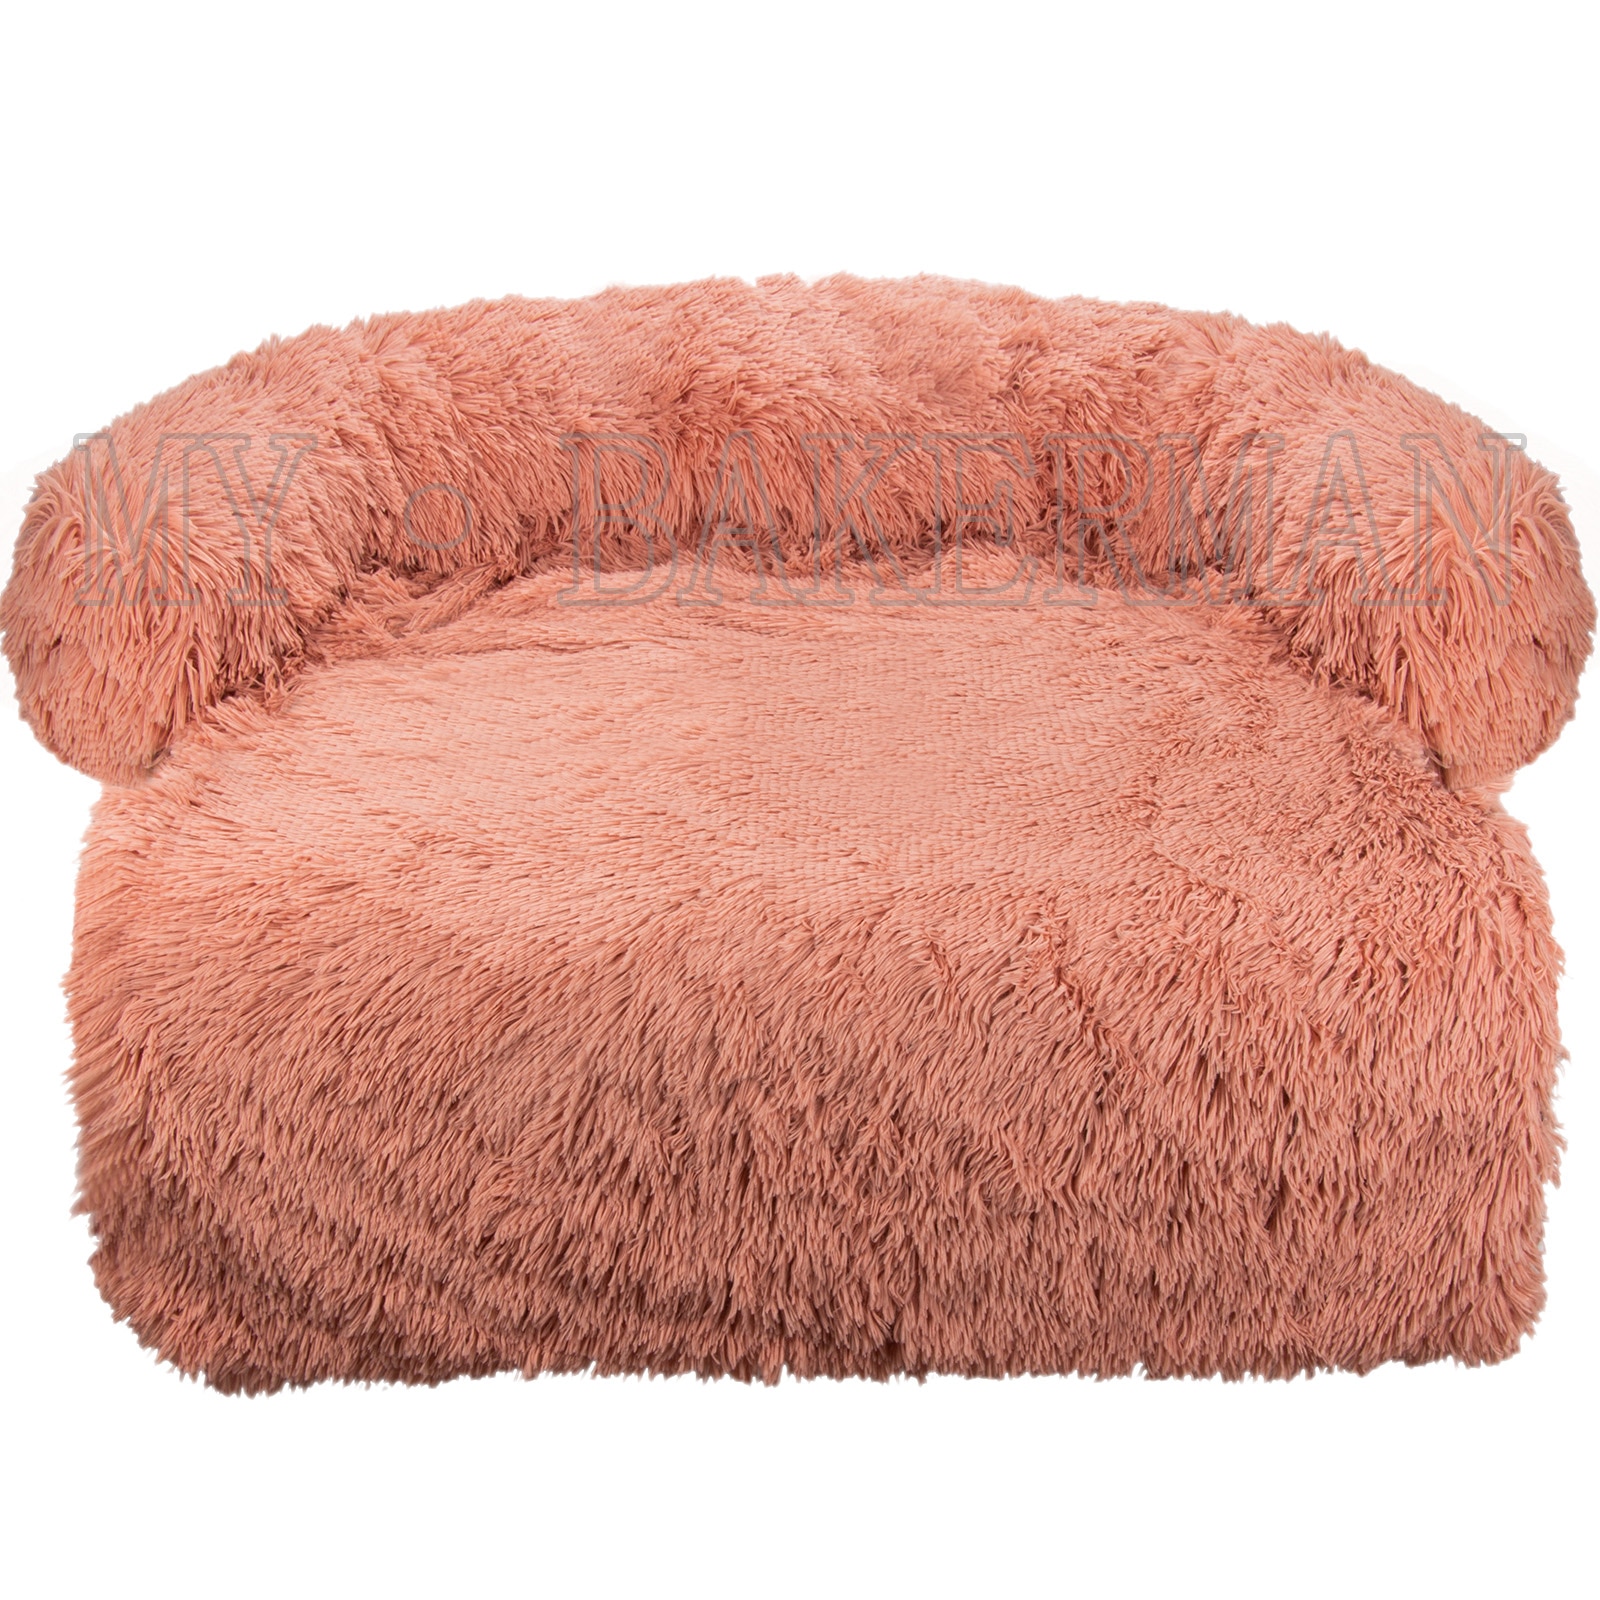 292311586 1 - Large Plush Dog Sofa Bed Couch Protector - thepamperedpooch-co, pet-beds, dog-beds